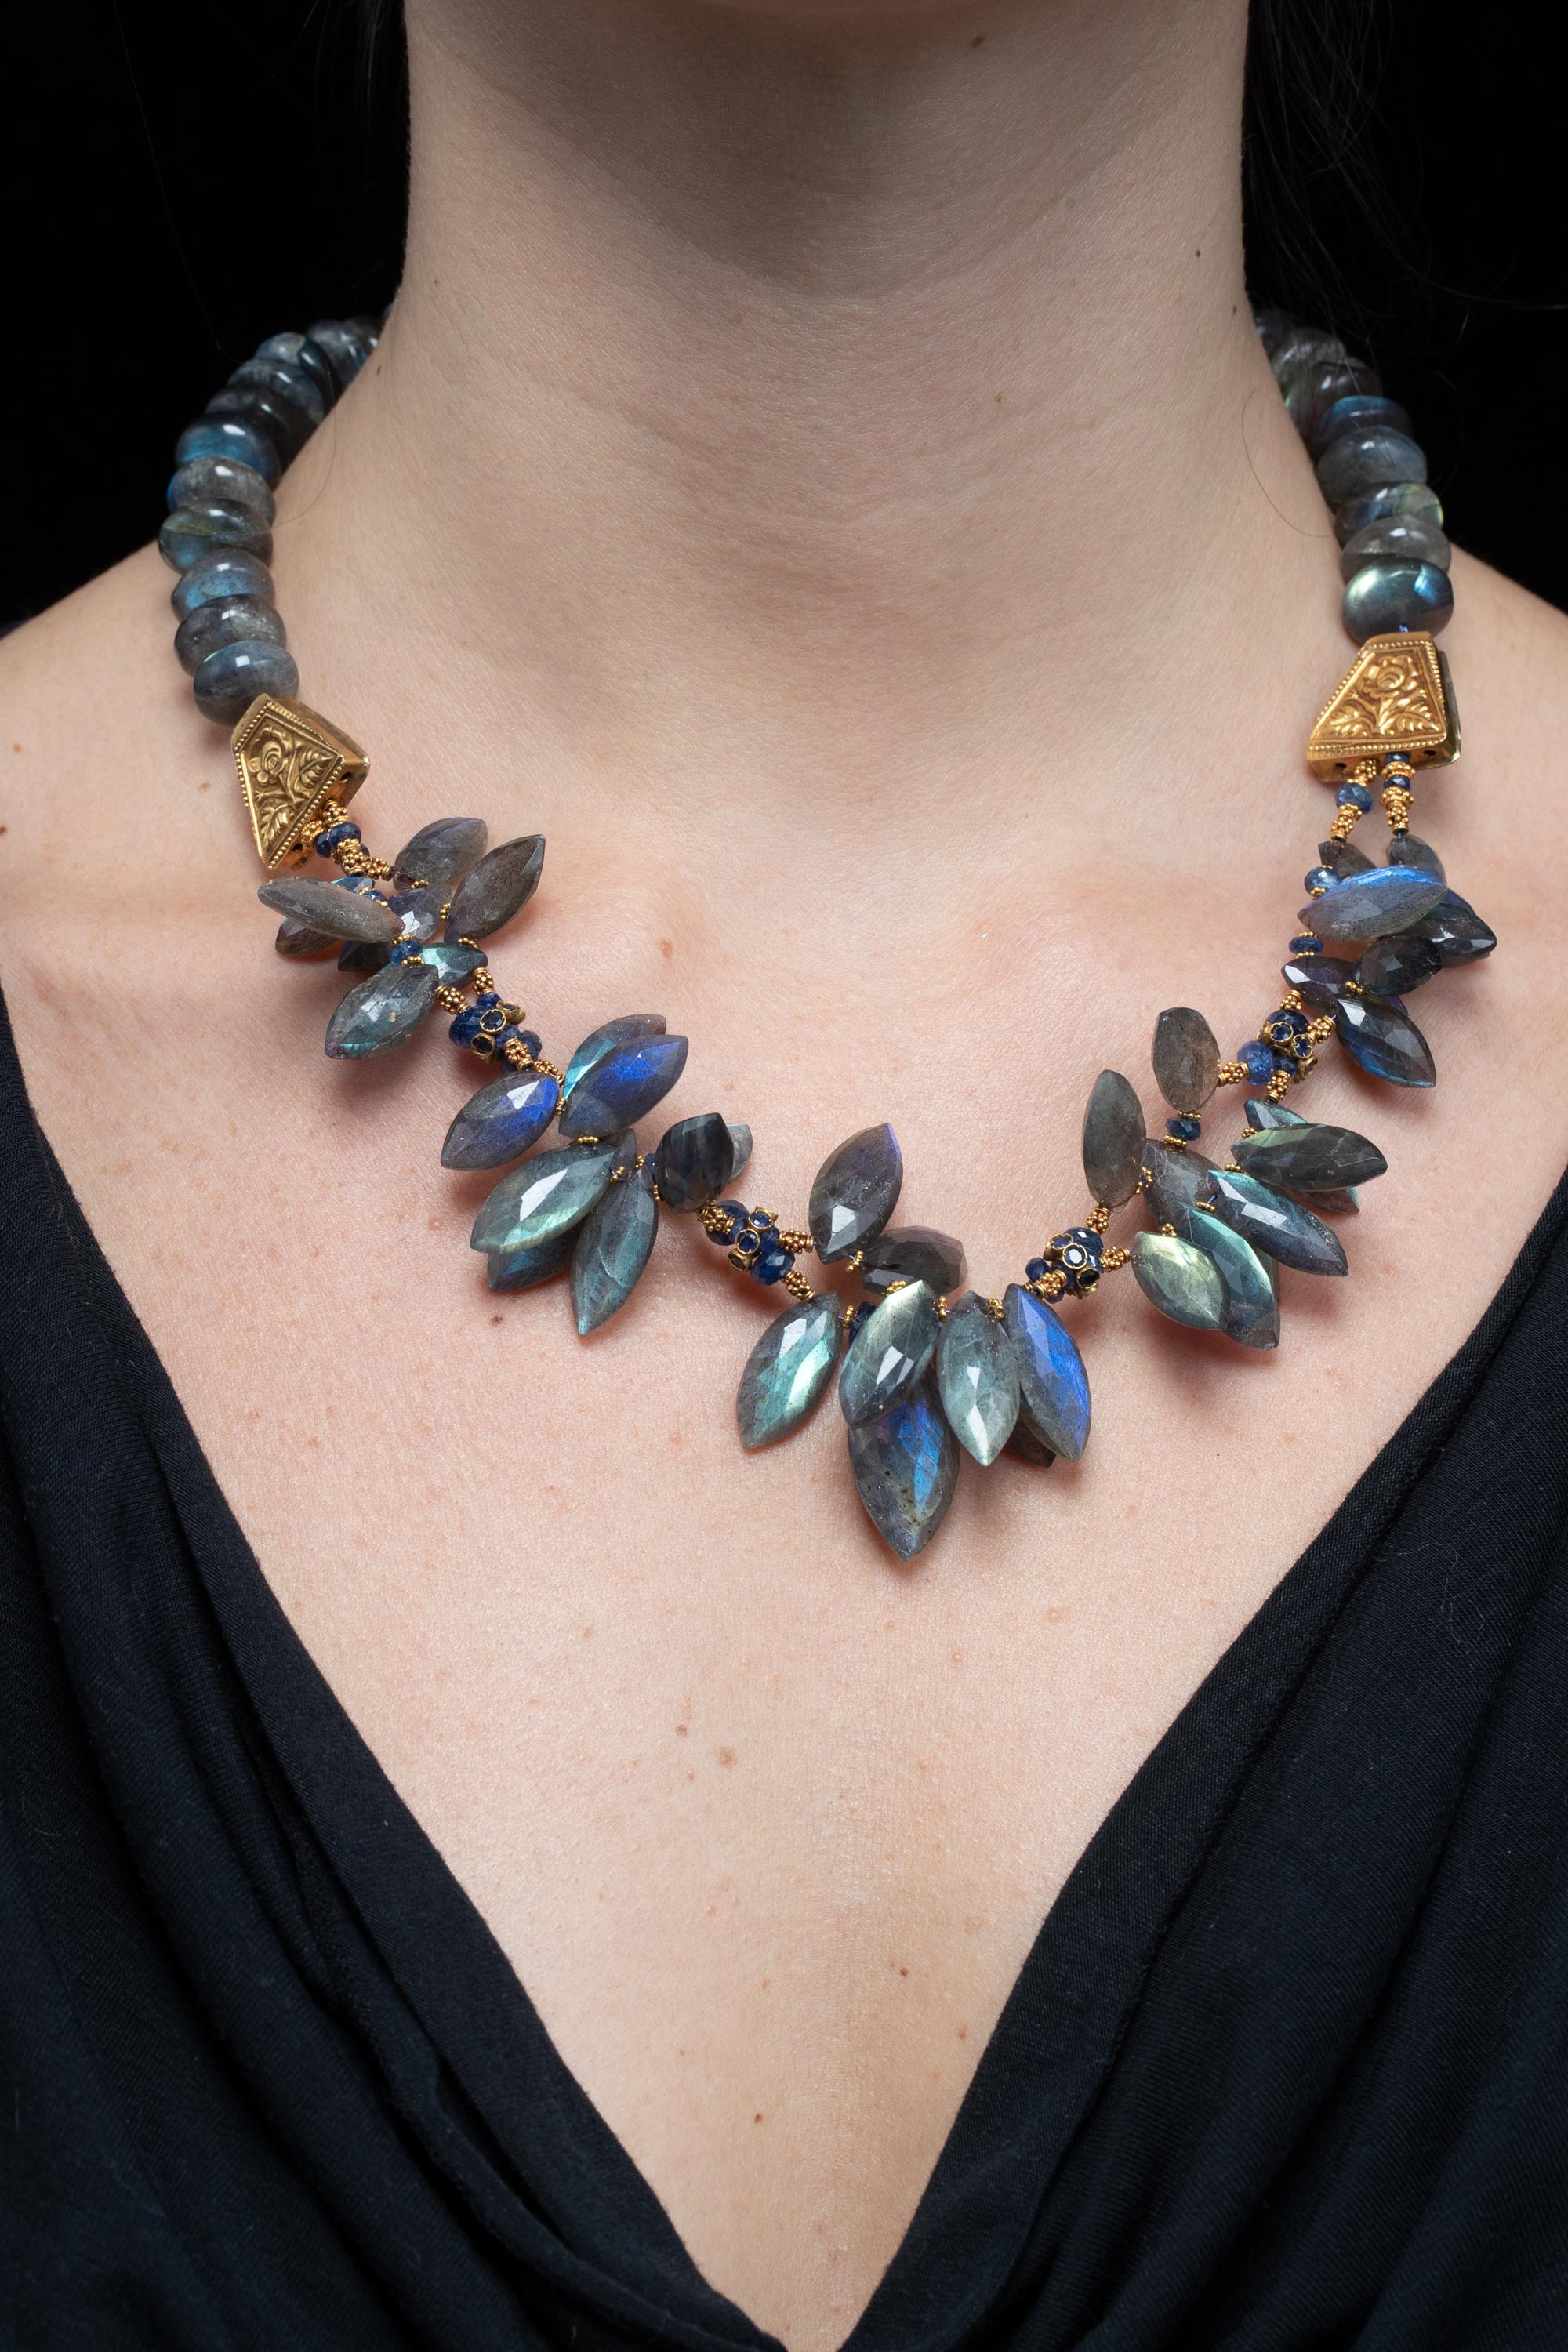 A cluster of faceted marquise-shaped labradorite stones, blue sapphires and 22K gold comprise this beaded necklace.   The Labradorite is a beautiful blue/gray color with great fire to the stones.  Faceted blue sapphires along with 22K gold